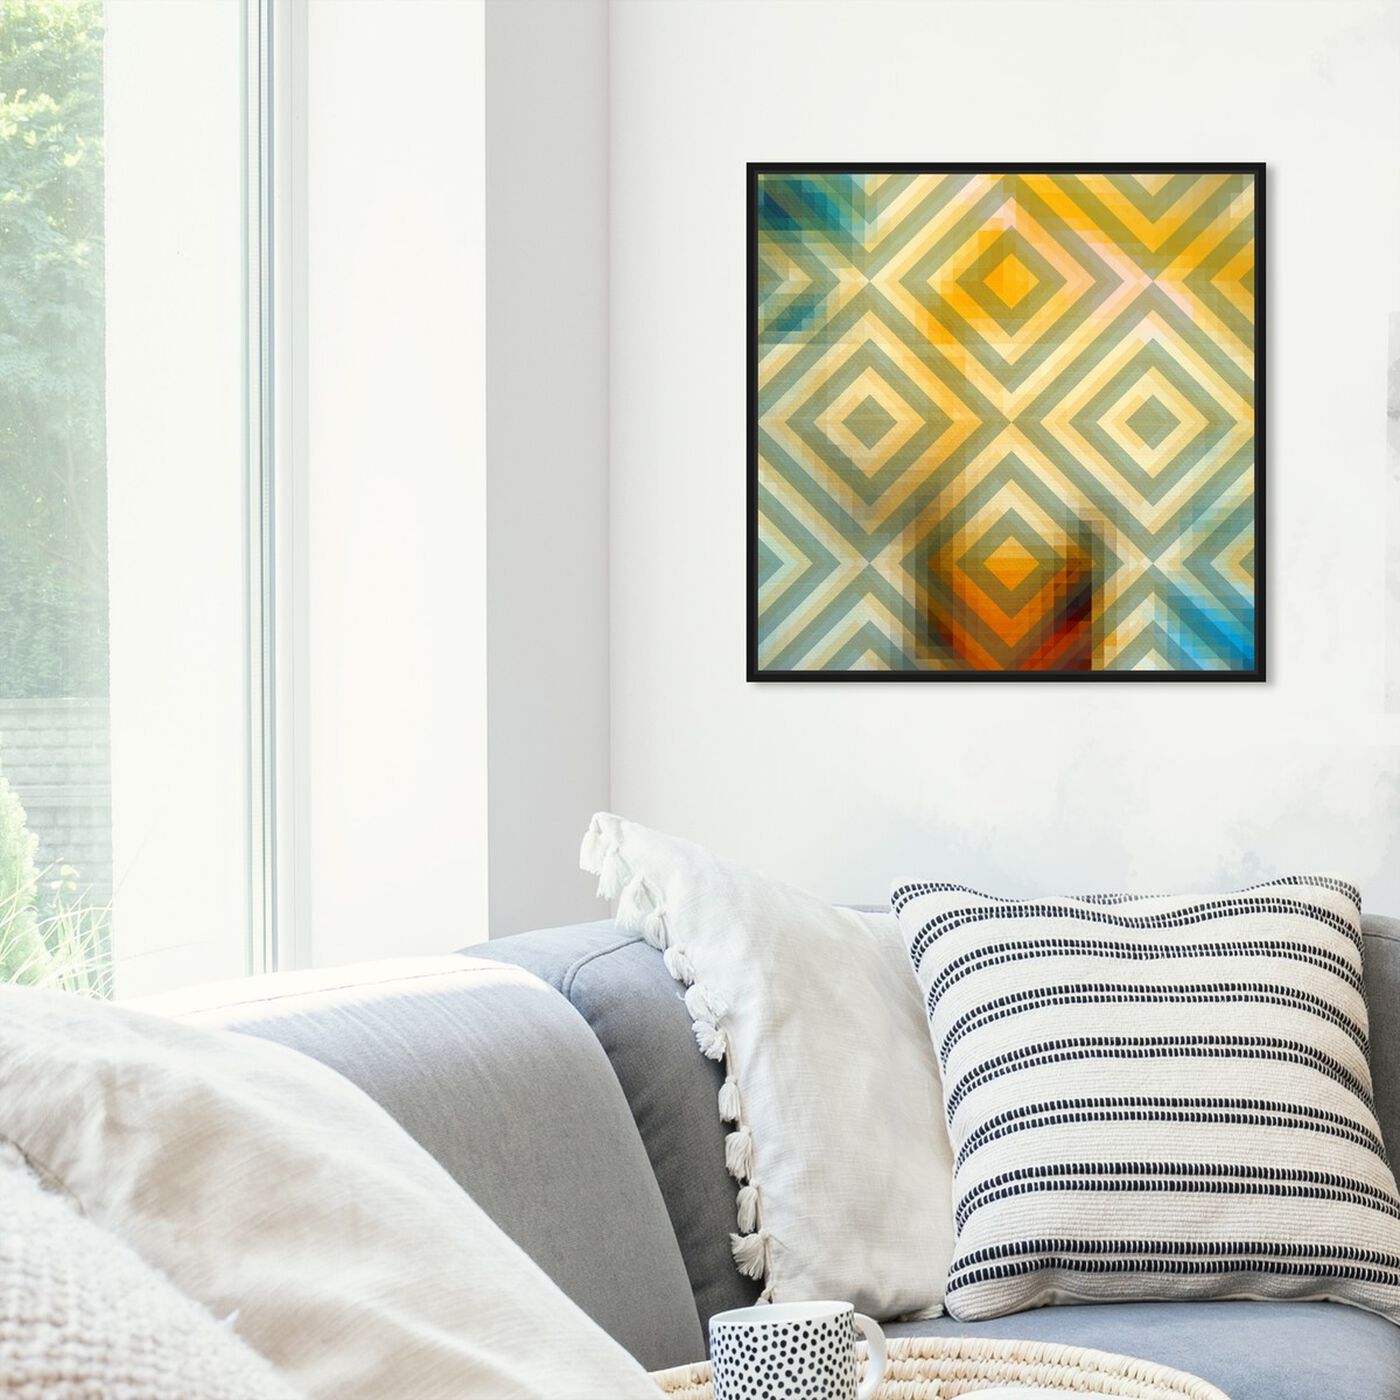 Hanging view of Restricted Memories featuring abstract and geometric art.